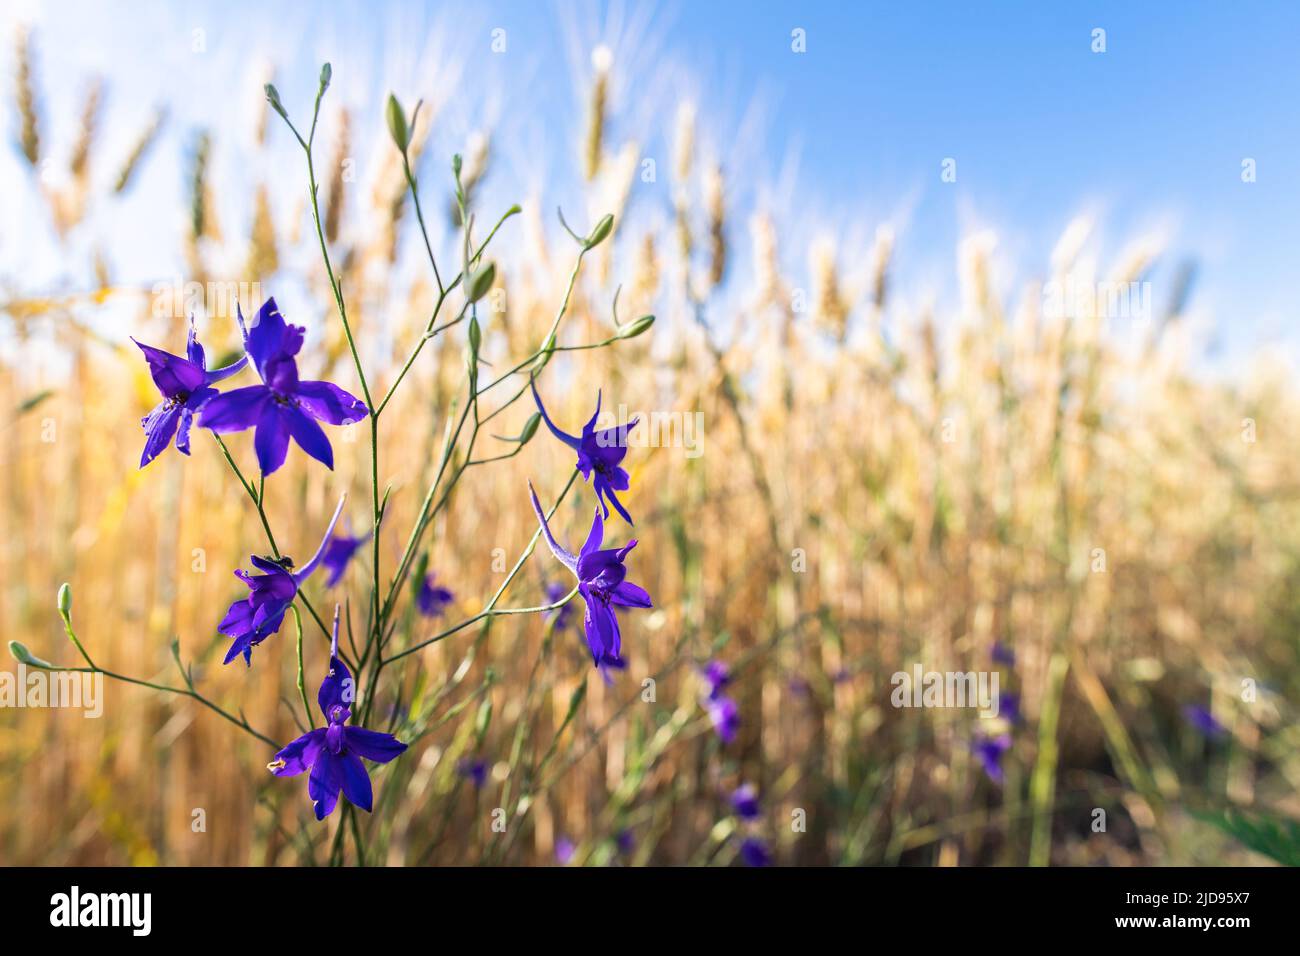 Beautiful wheat field almost ready for harvest with blue flowers. Stock Photo